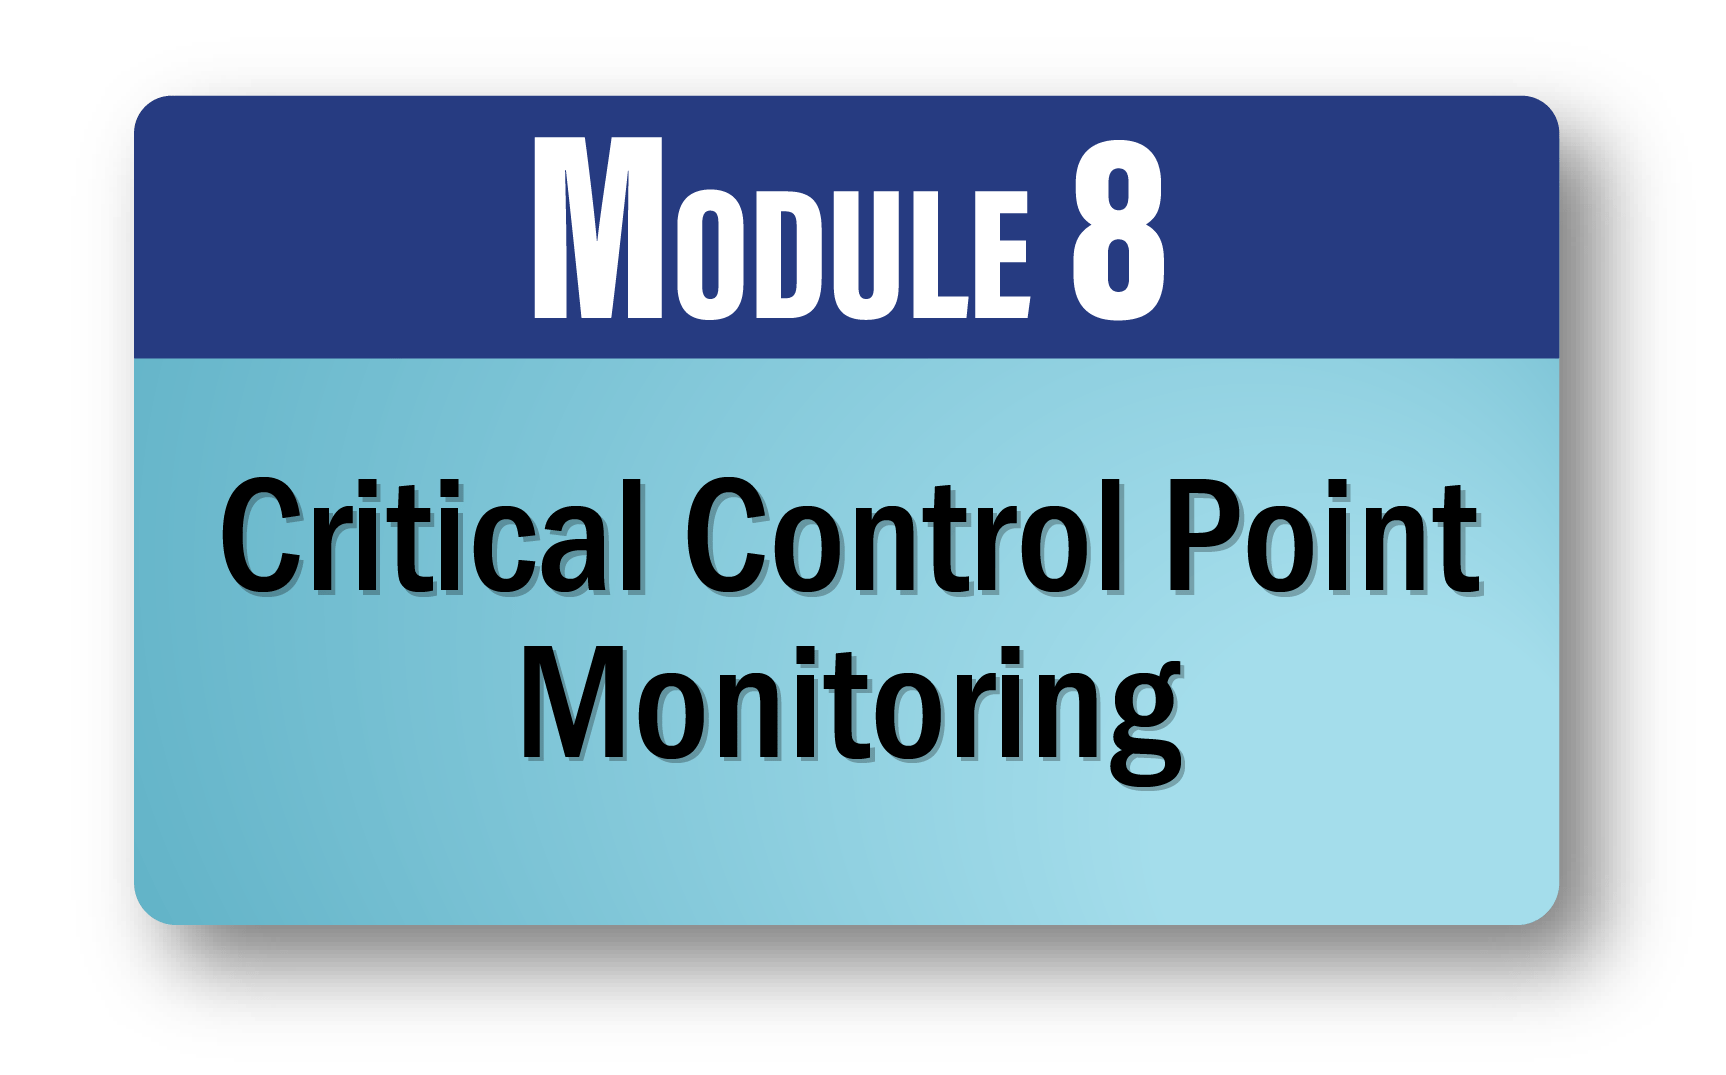 Module 8: Critical Control Point Monitoring